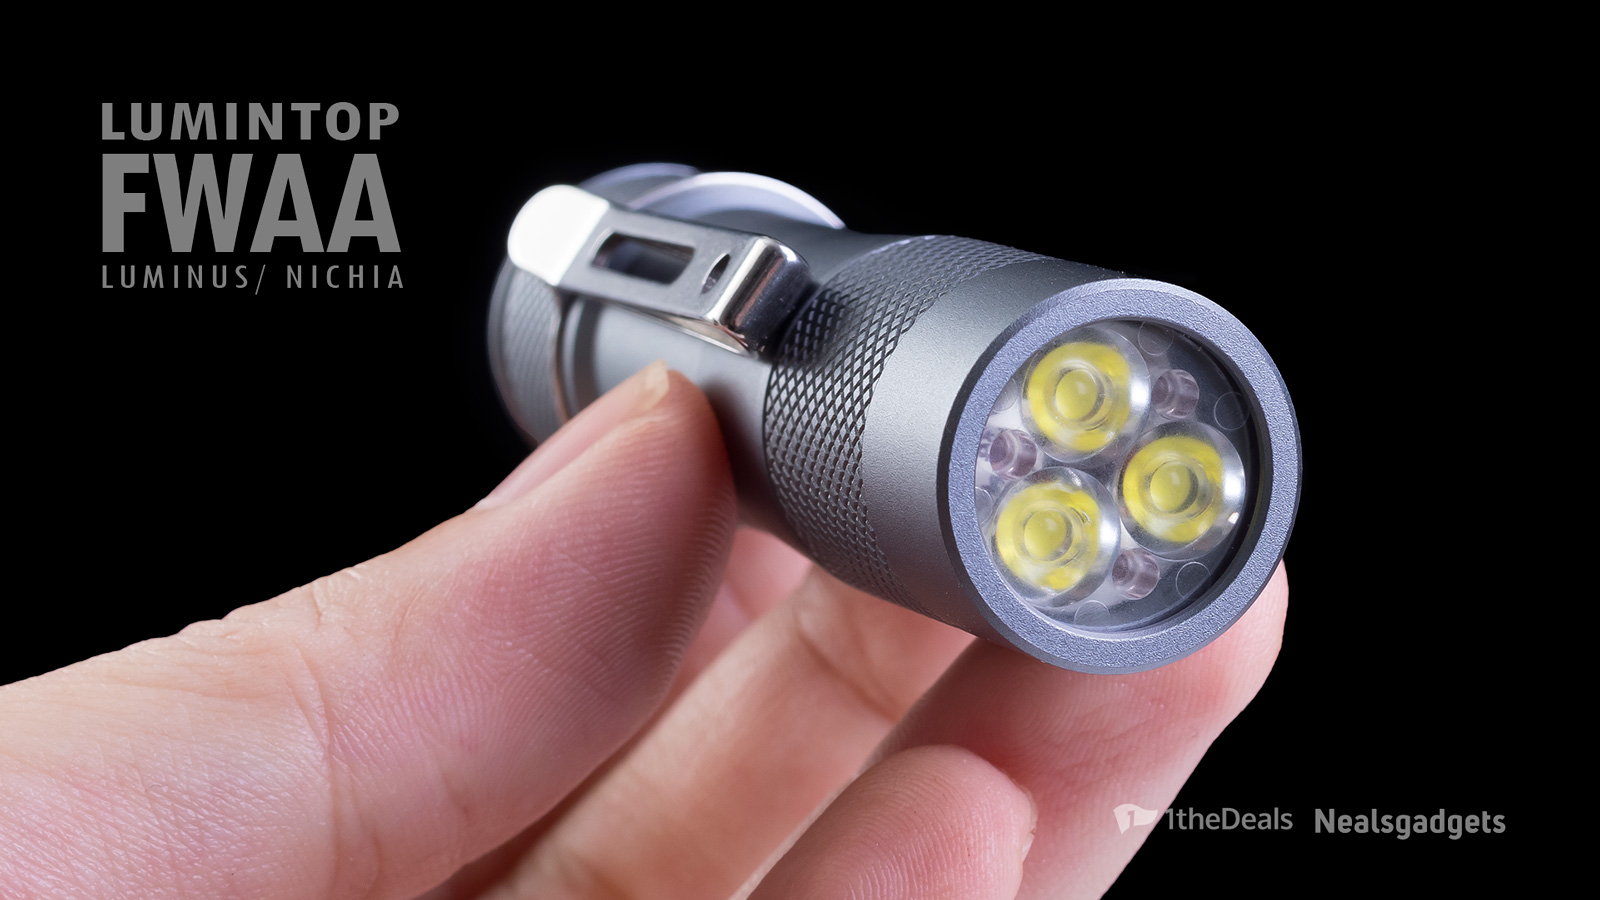 1thedeals-1600p-featured-07-lumintop-fwaa-05.jpg